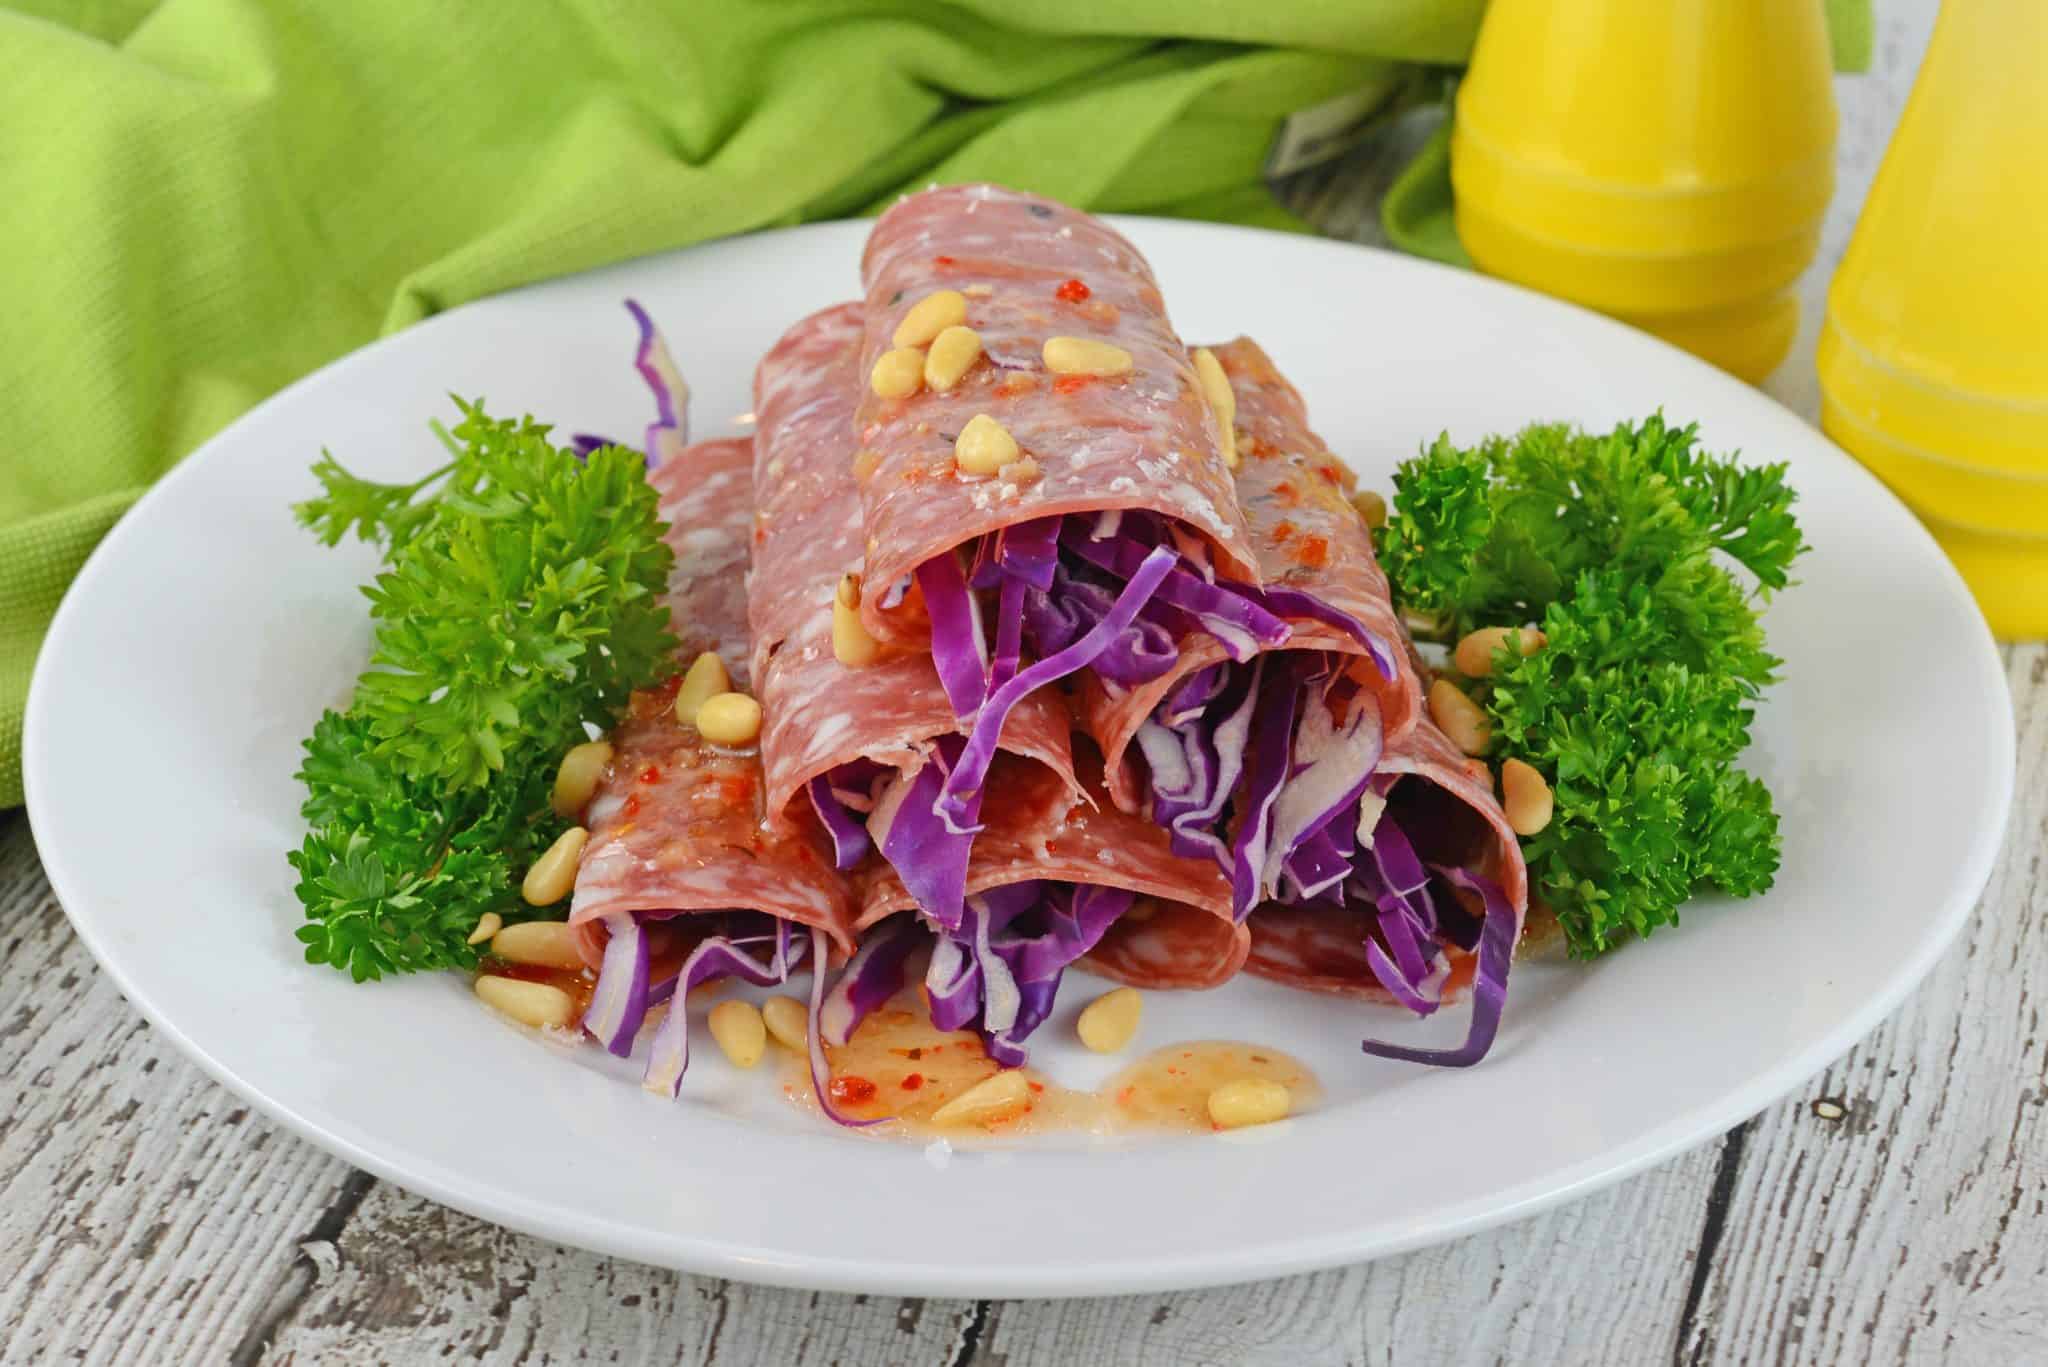 Soppressata Finger Salads are an easy, no cook appetizer filled with shredded red cabbage, pepperoncinis, goat cheese and zesty Italian dressing!